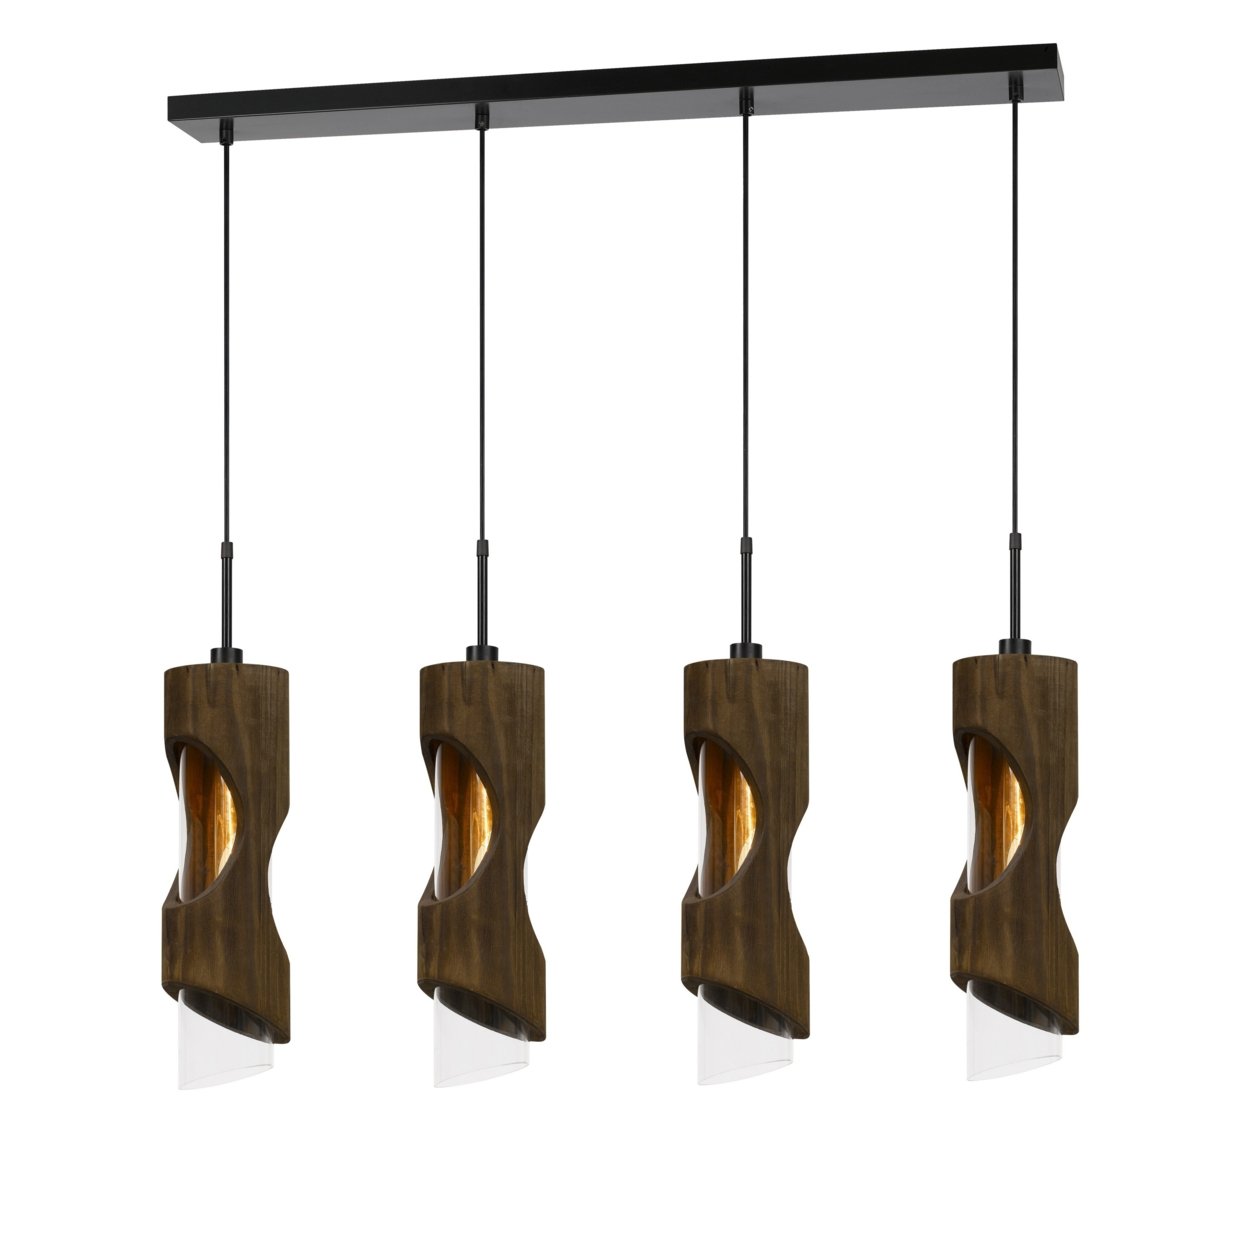 4 Light Metal Frame Pendant Fixture With Wooden And Glass Shades, Brown- Saltoro Sherpi